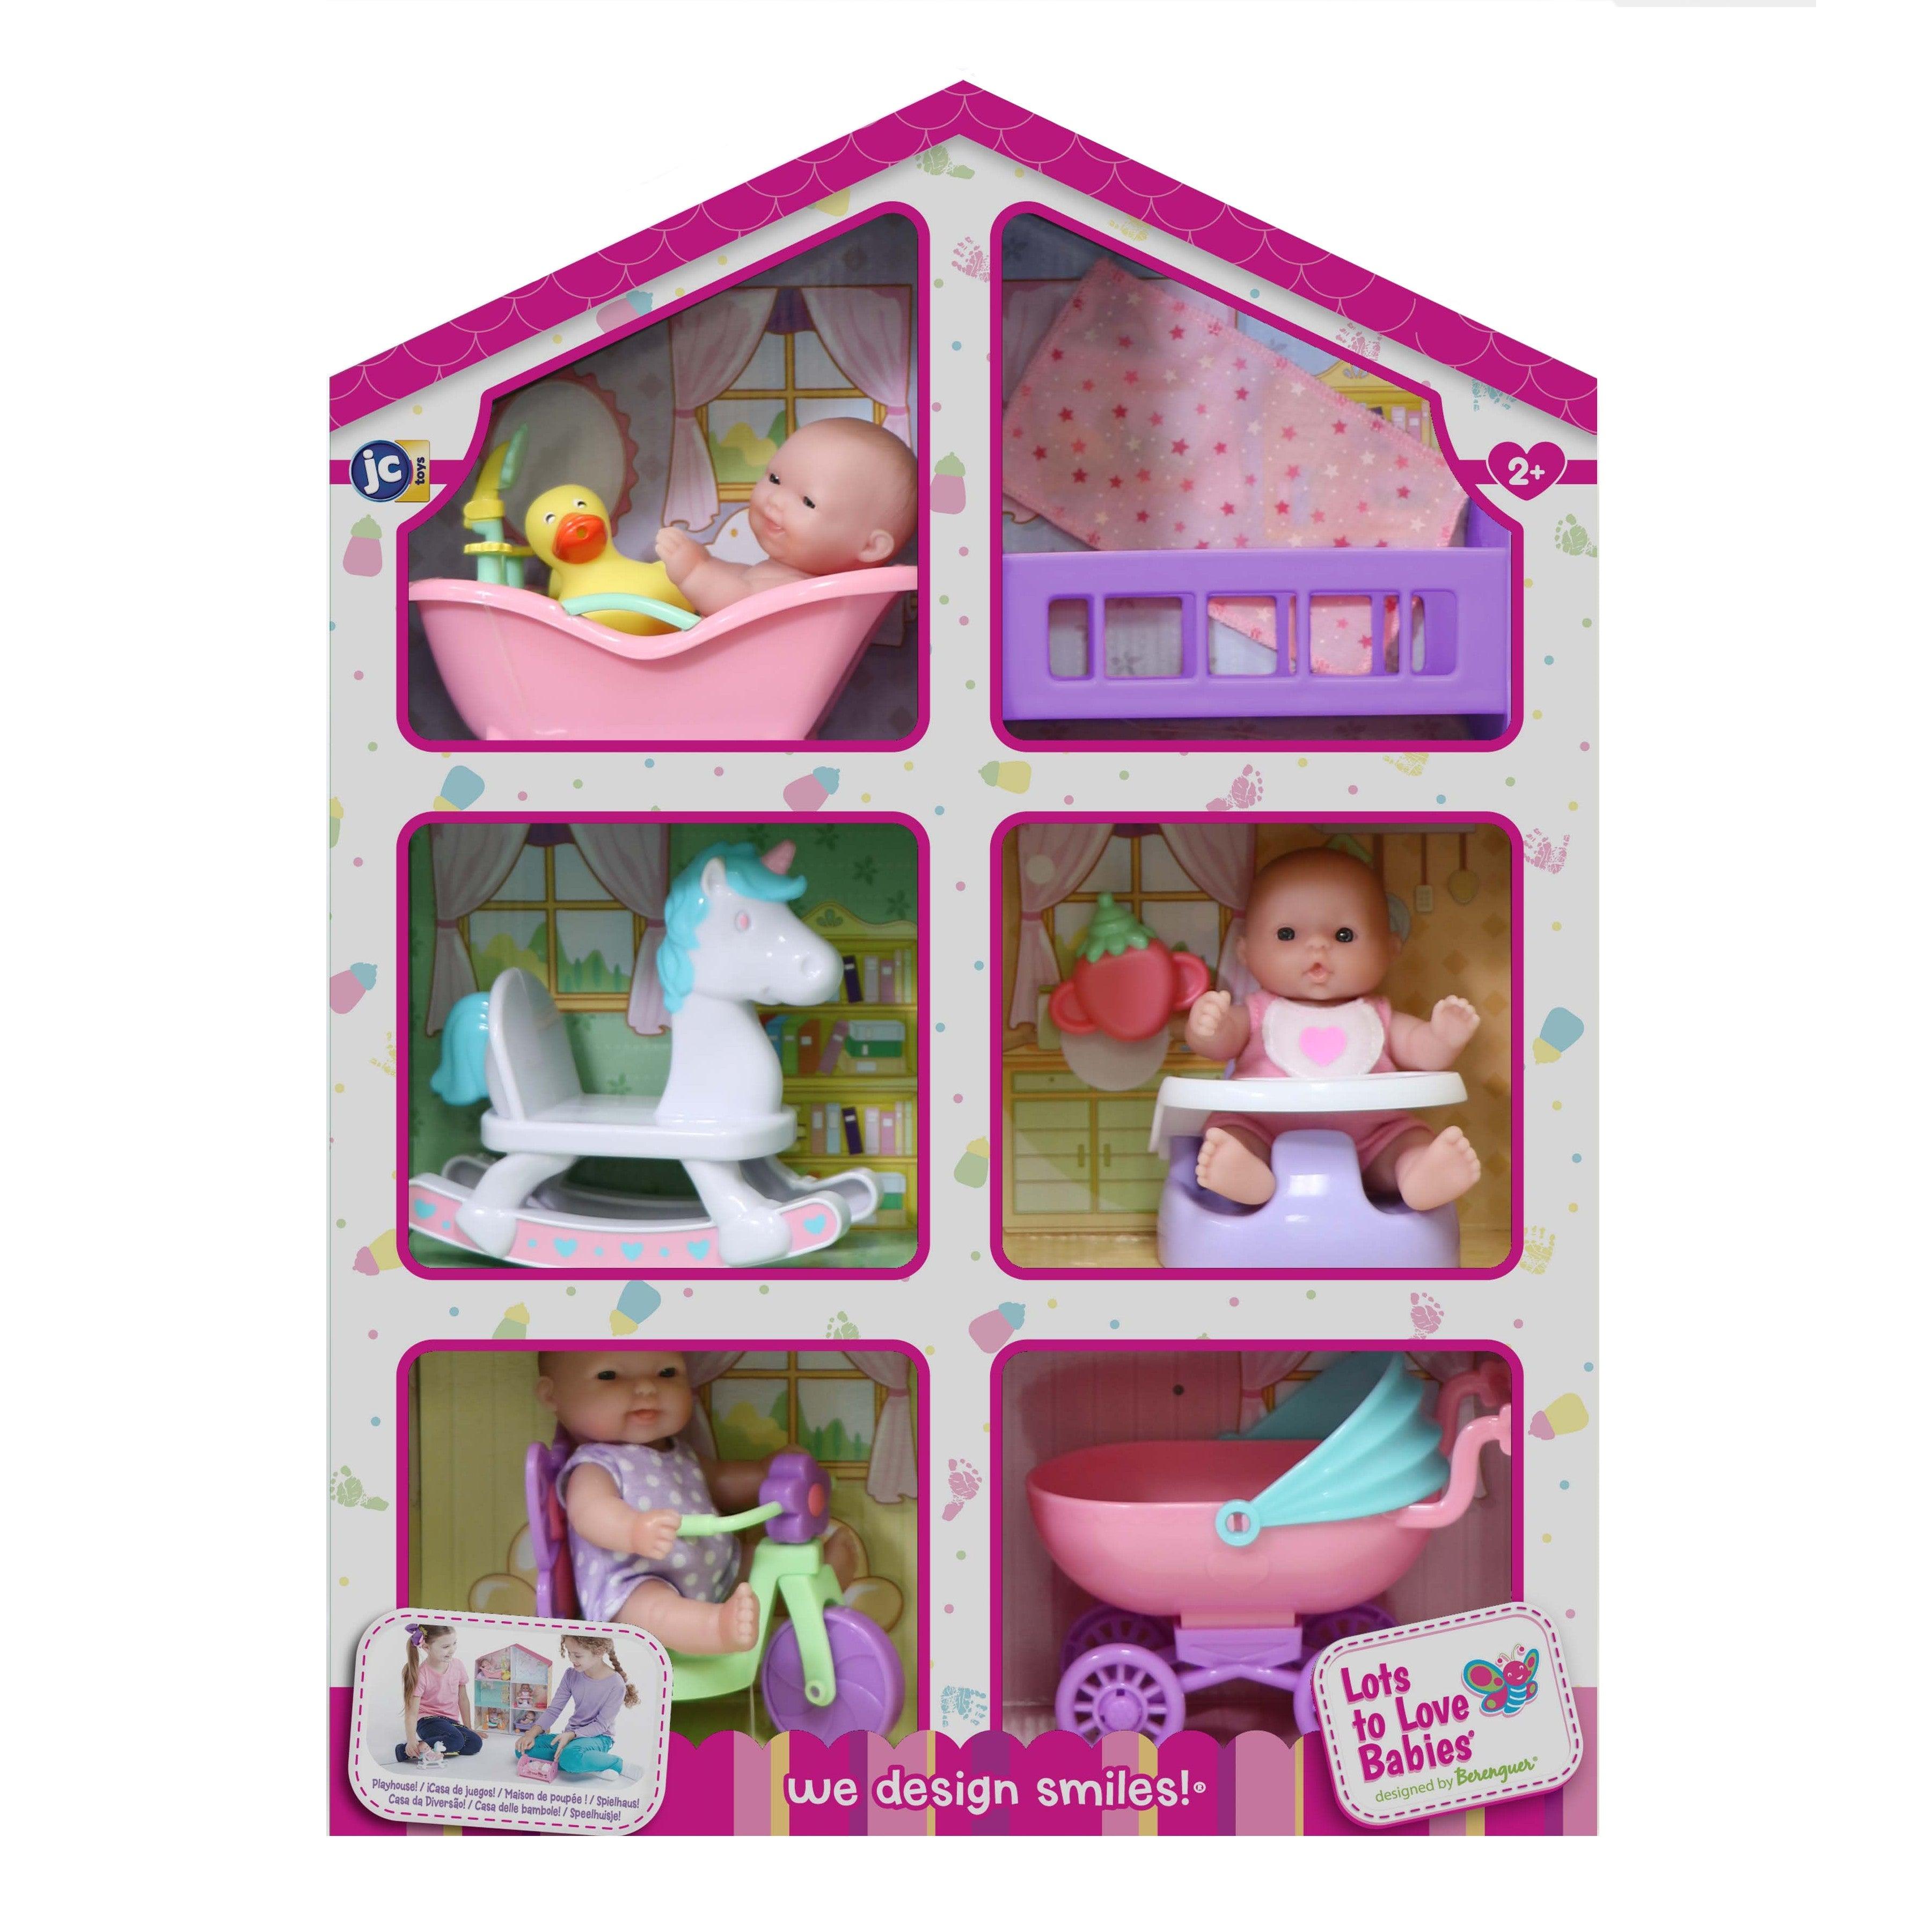 Lots to Love Babies – JC Toys Group Inc.